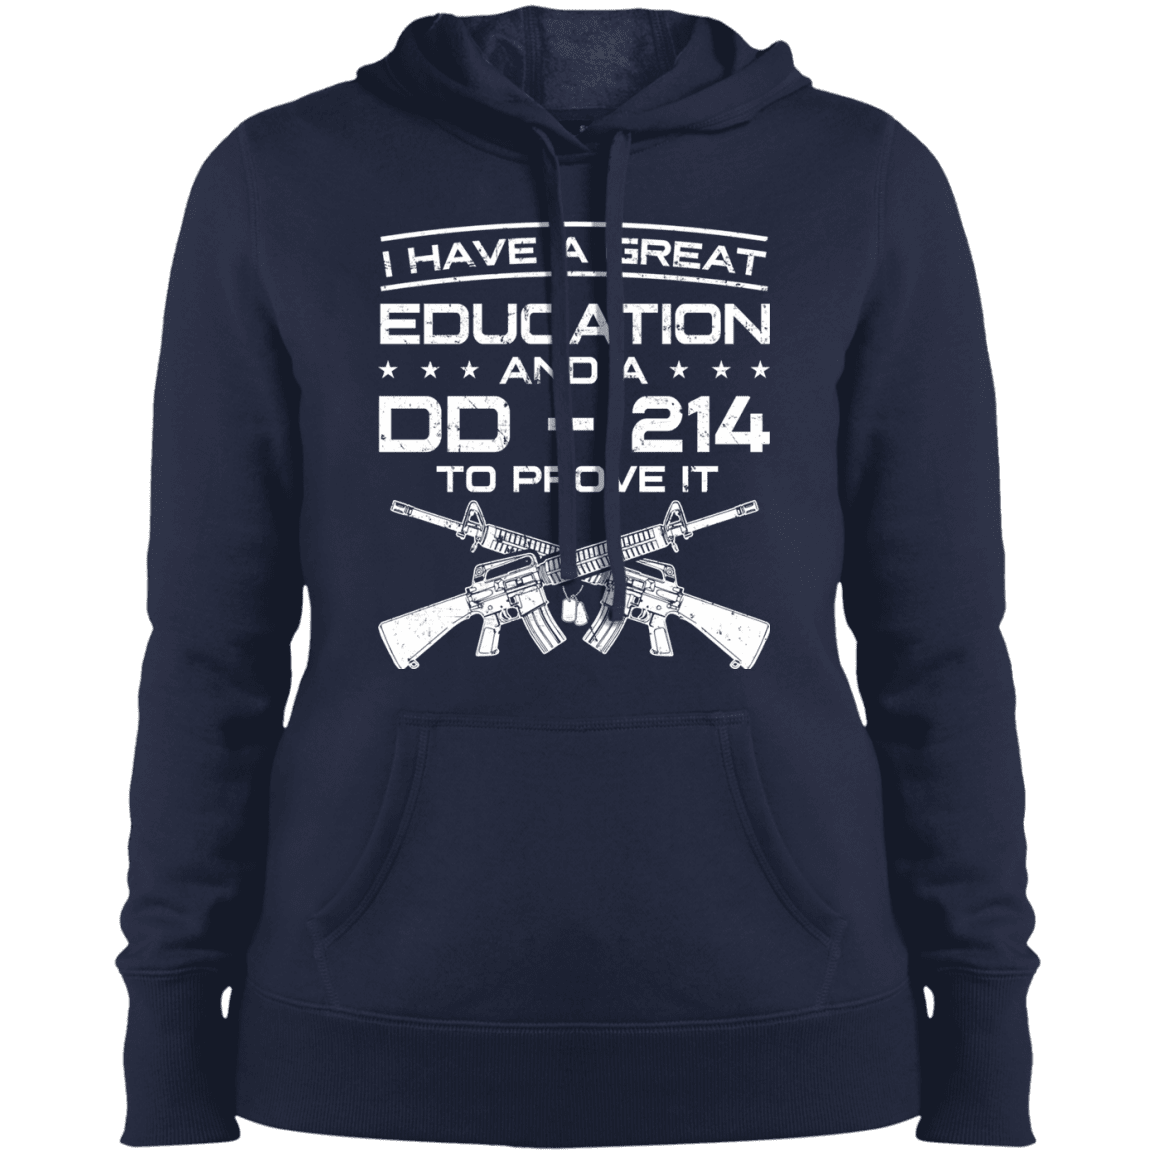 Military T-Shirt "I Have A Great Education And A DD 214 To Prove It - Women" Front-TShirt-General-Veterans Nation